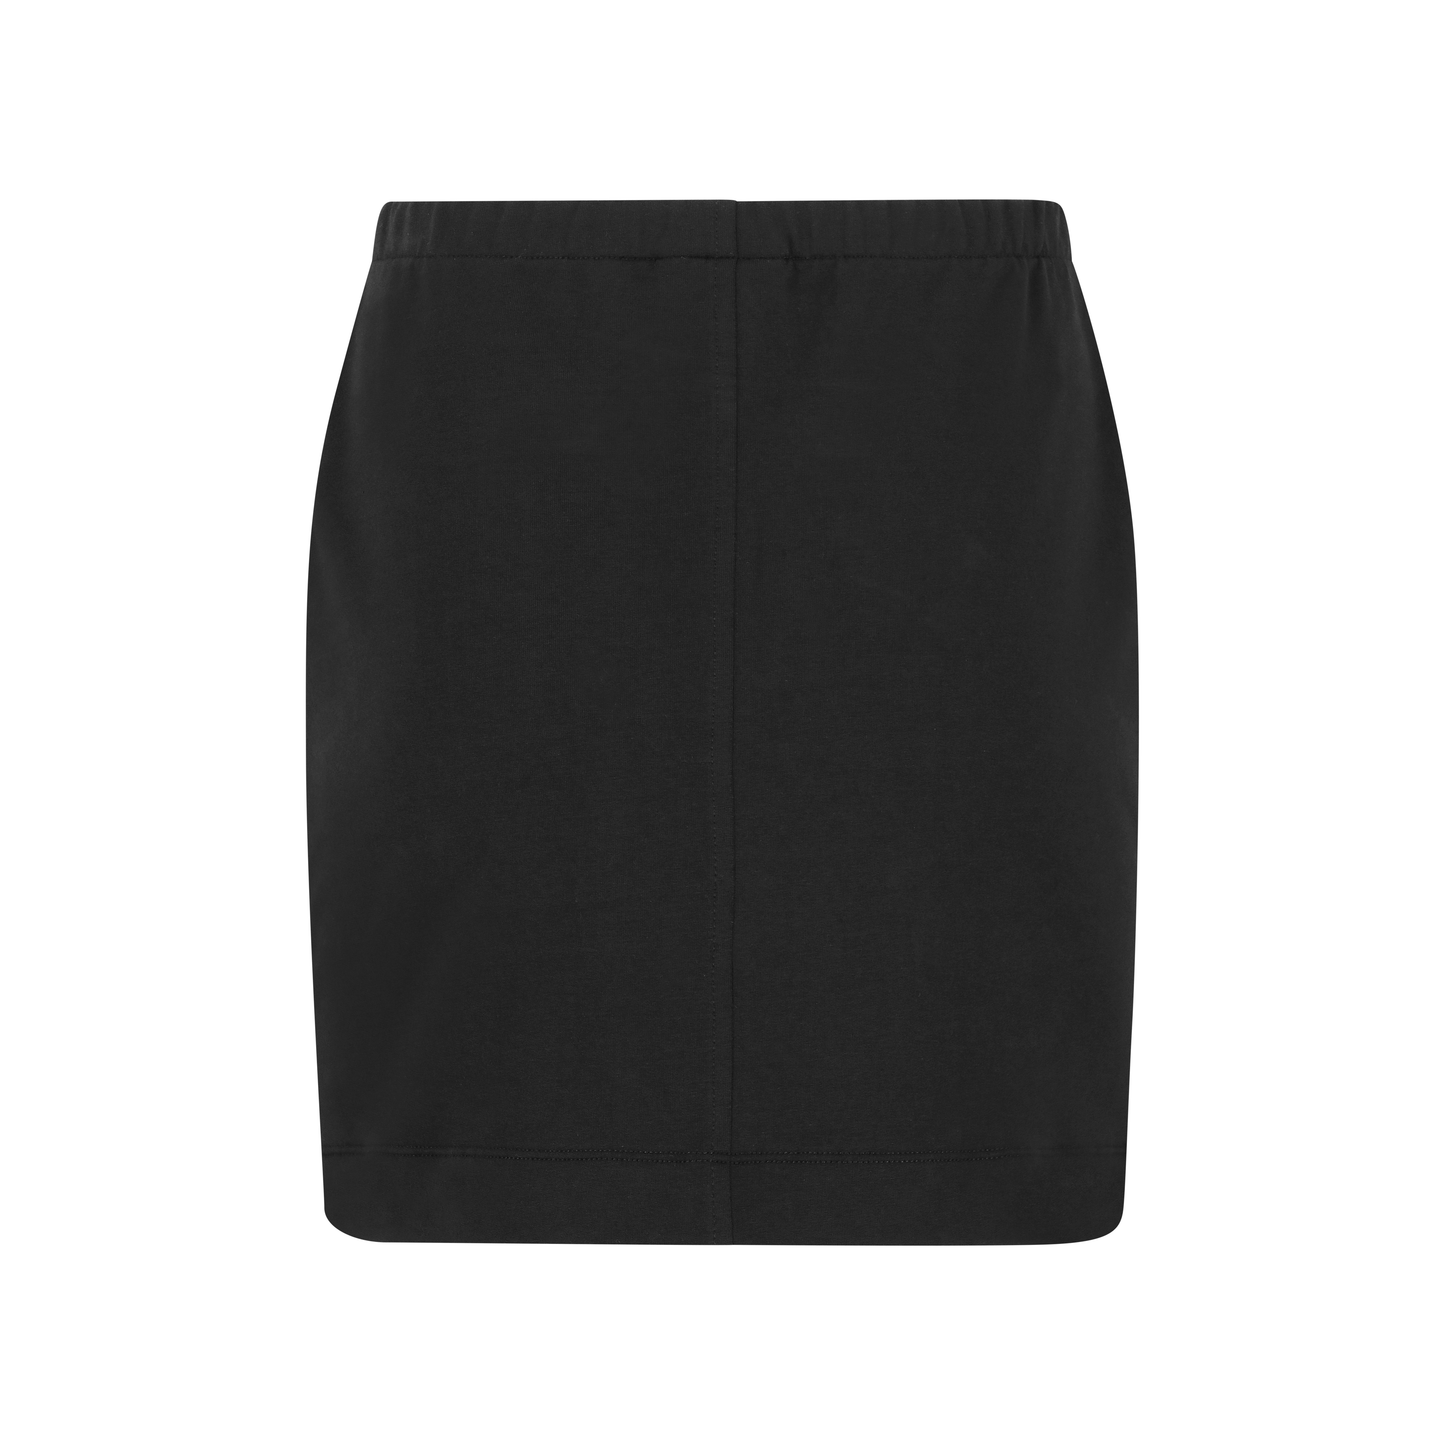 POINTY Skirt Mid - Pure Black - Made on demand